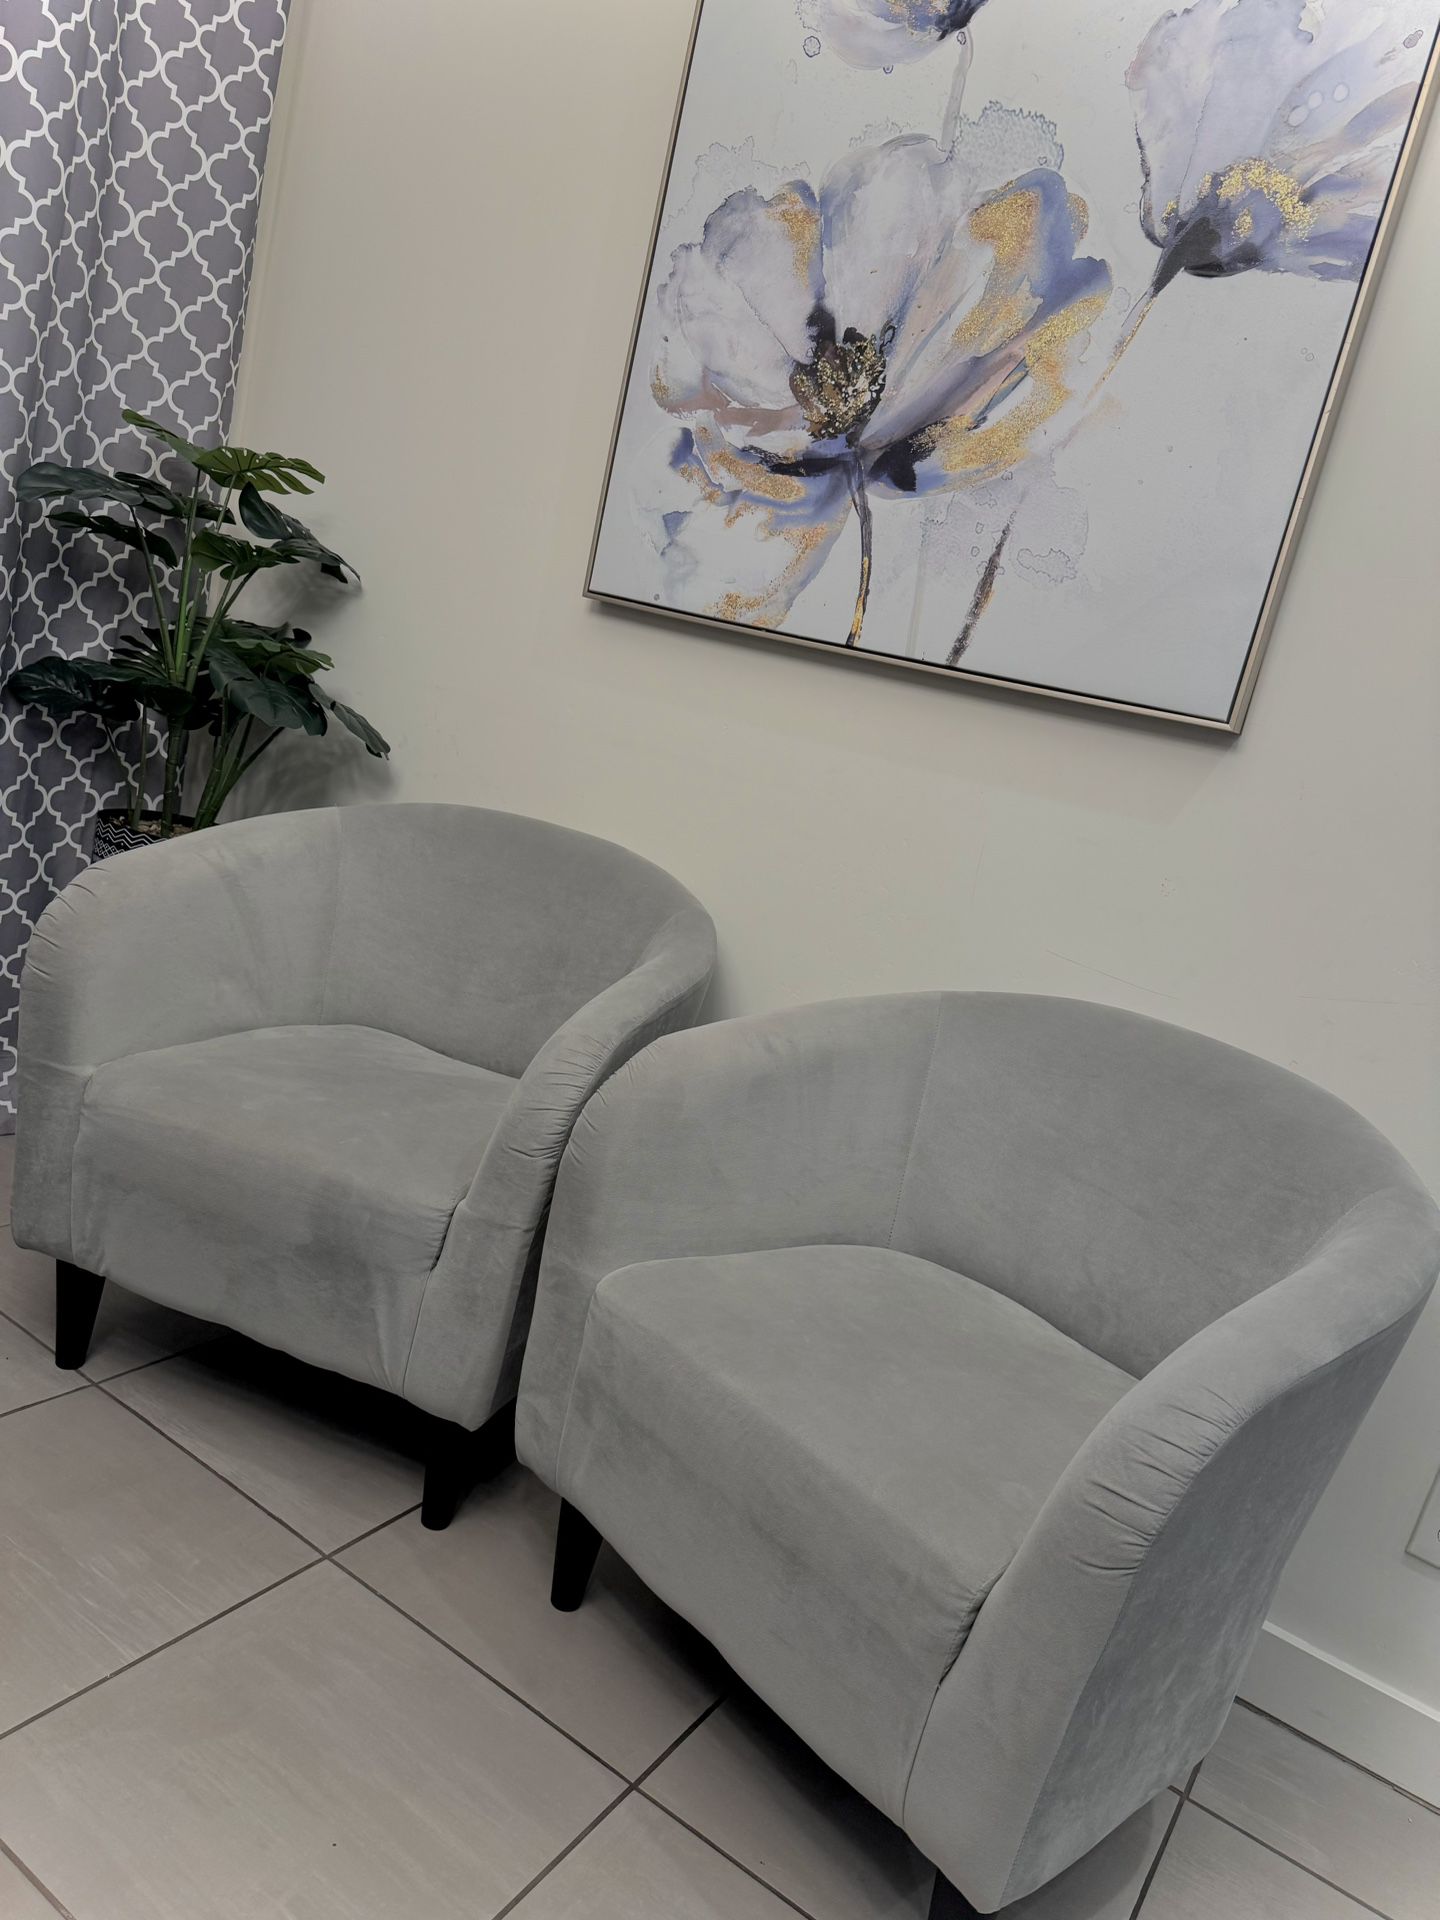 2 Microfiber Accent Chairs. Elegant, Comfy And Vaery Fashionable. 